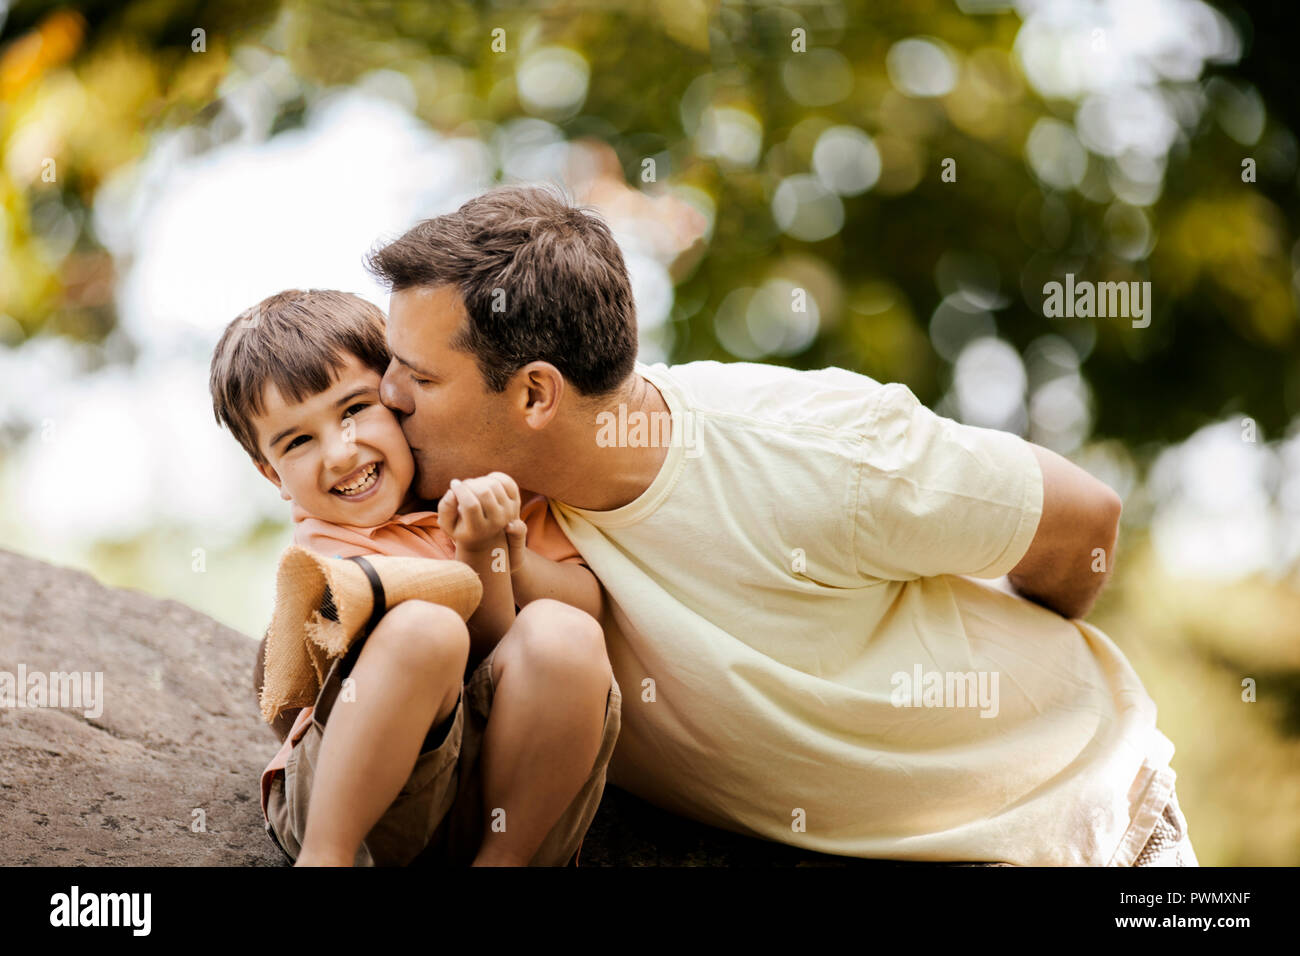 Father kissing his smiling young son on the cheek. Stock Photo